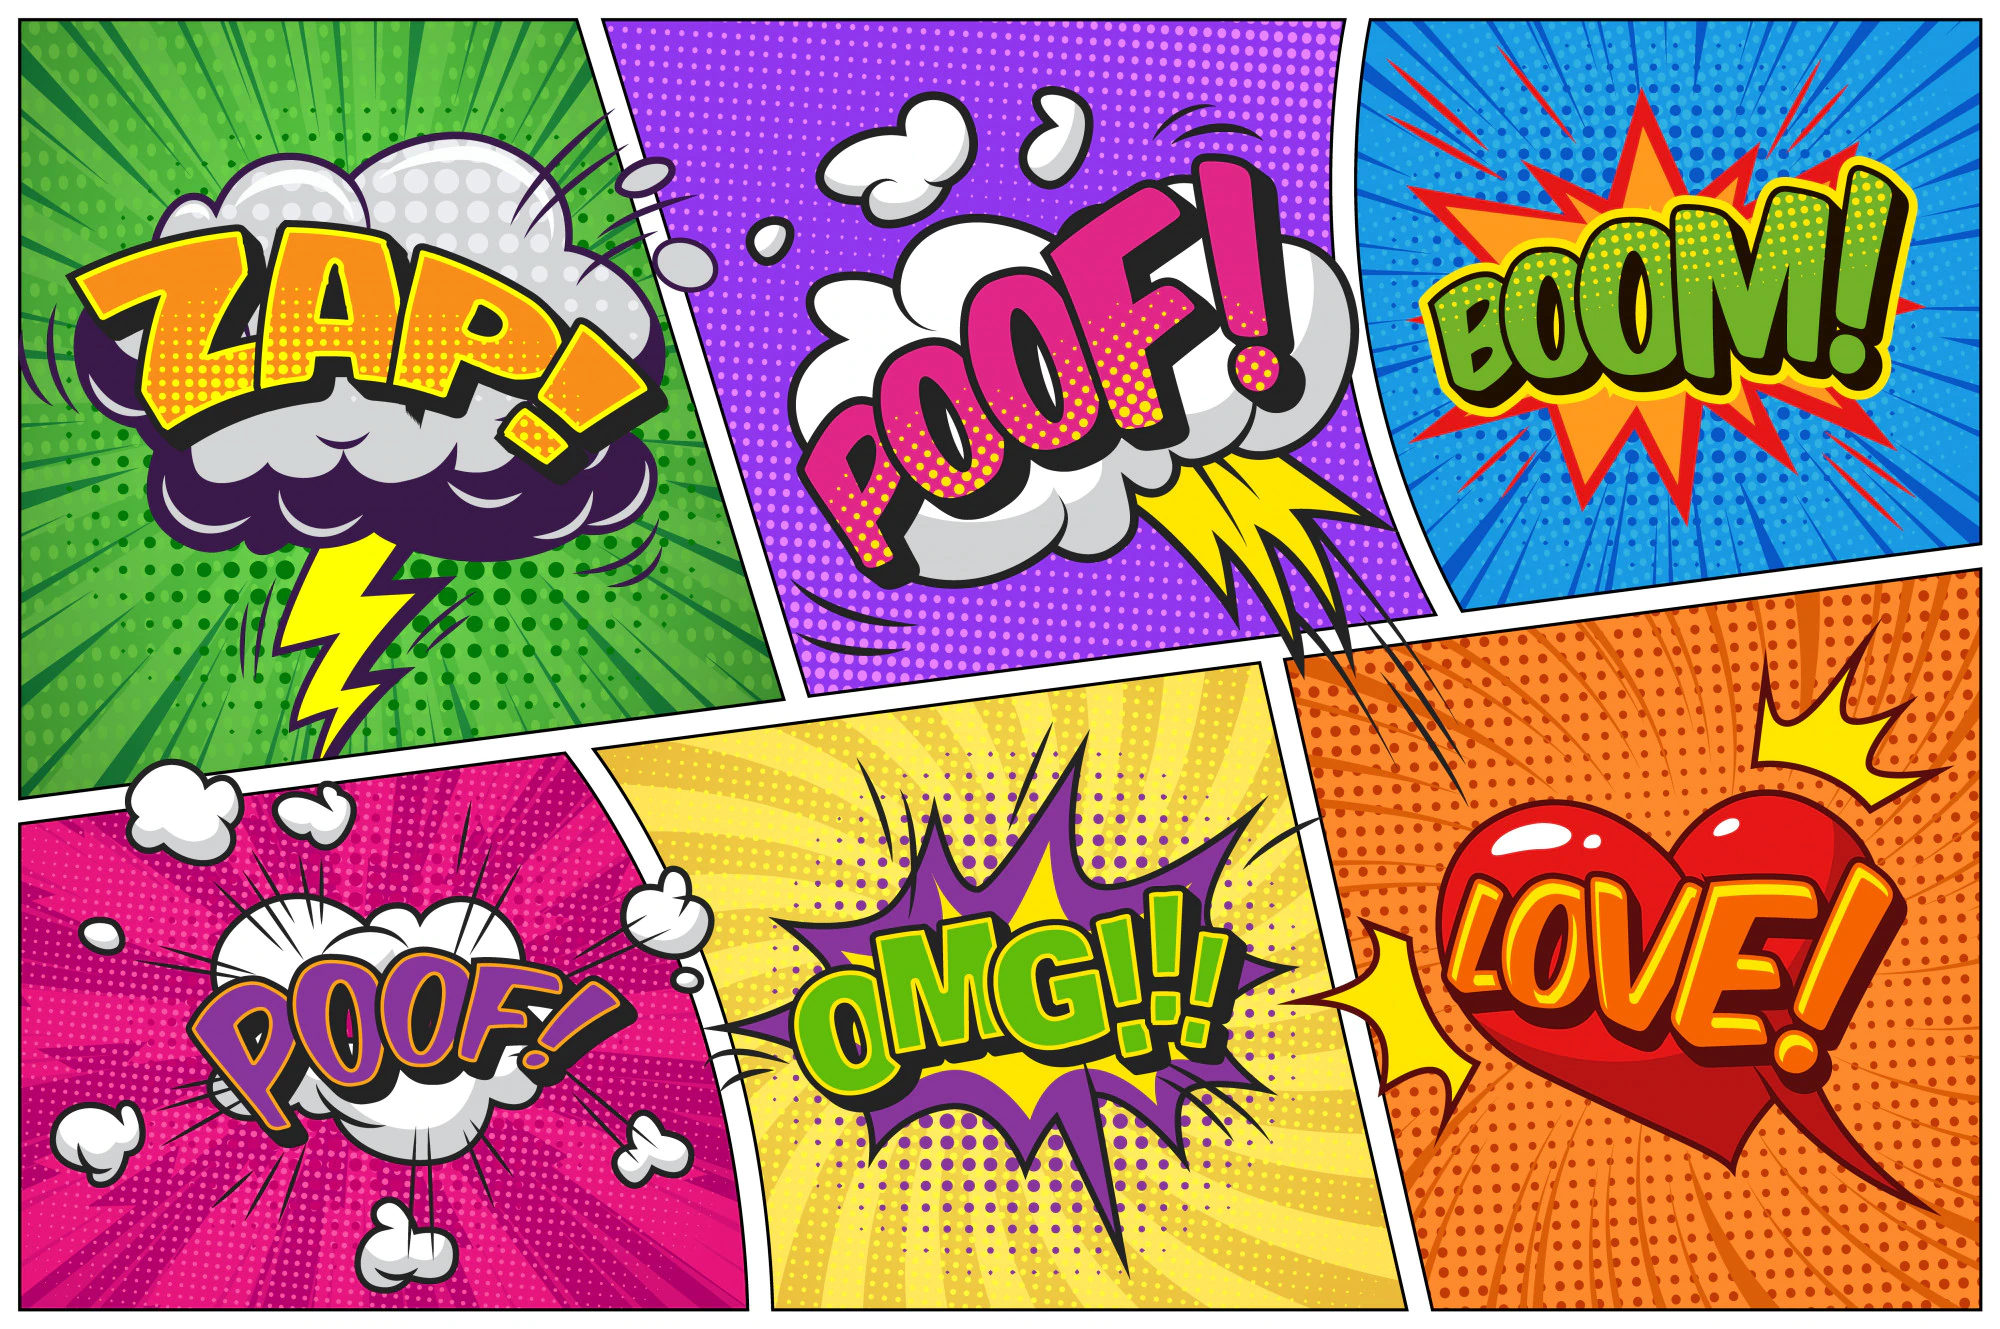 comic bright template with speech bubbles on colorful frames 225004 687